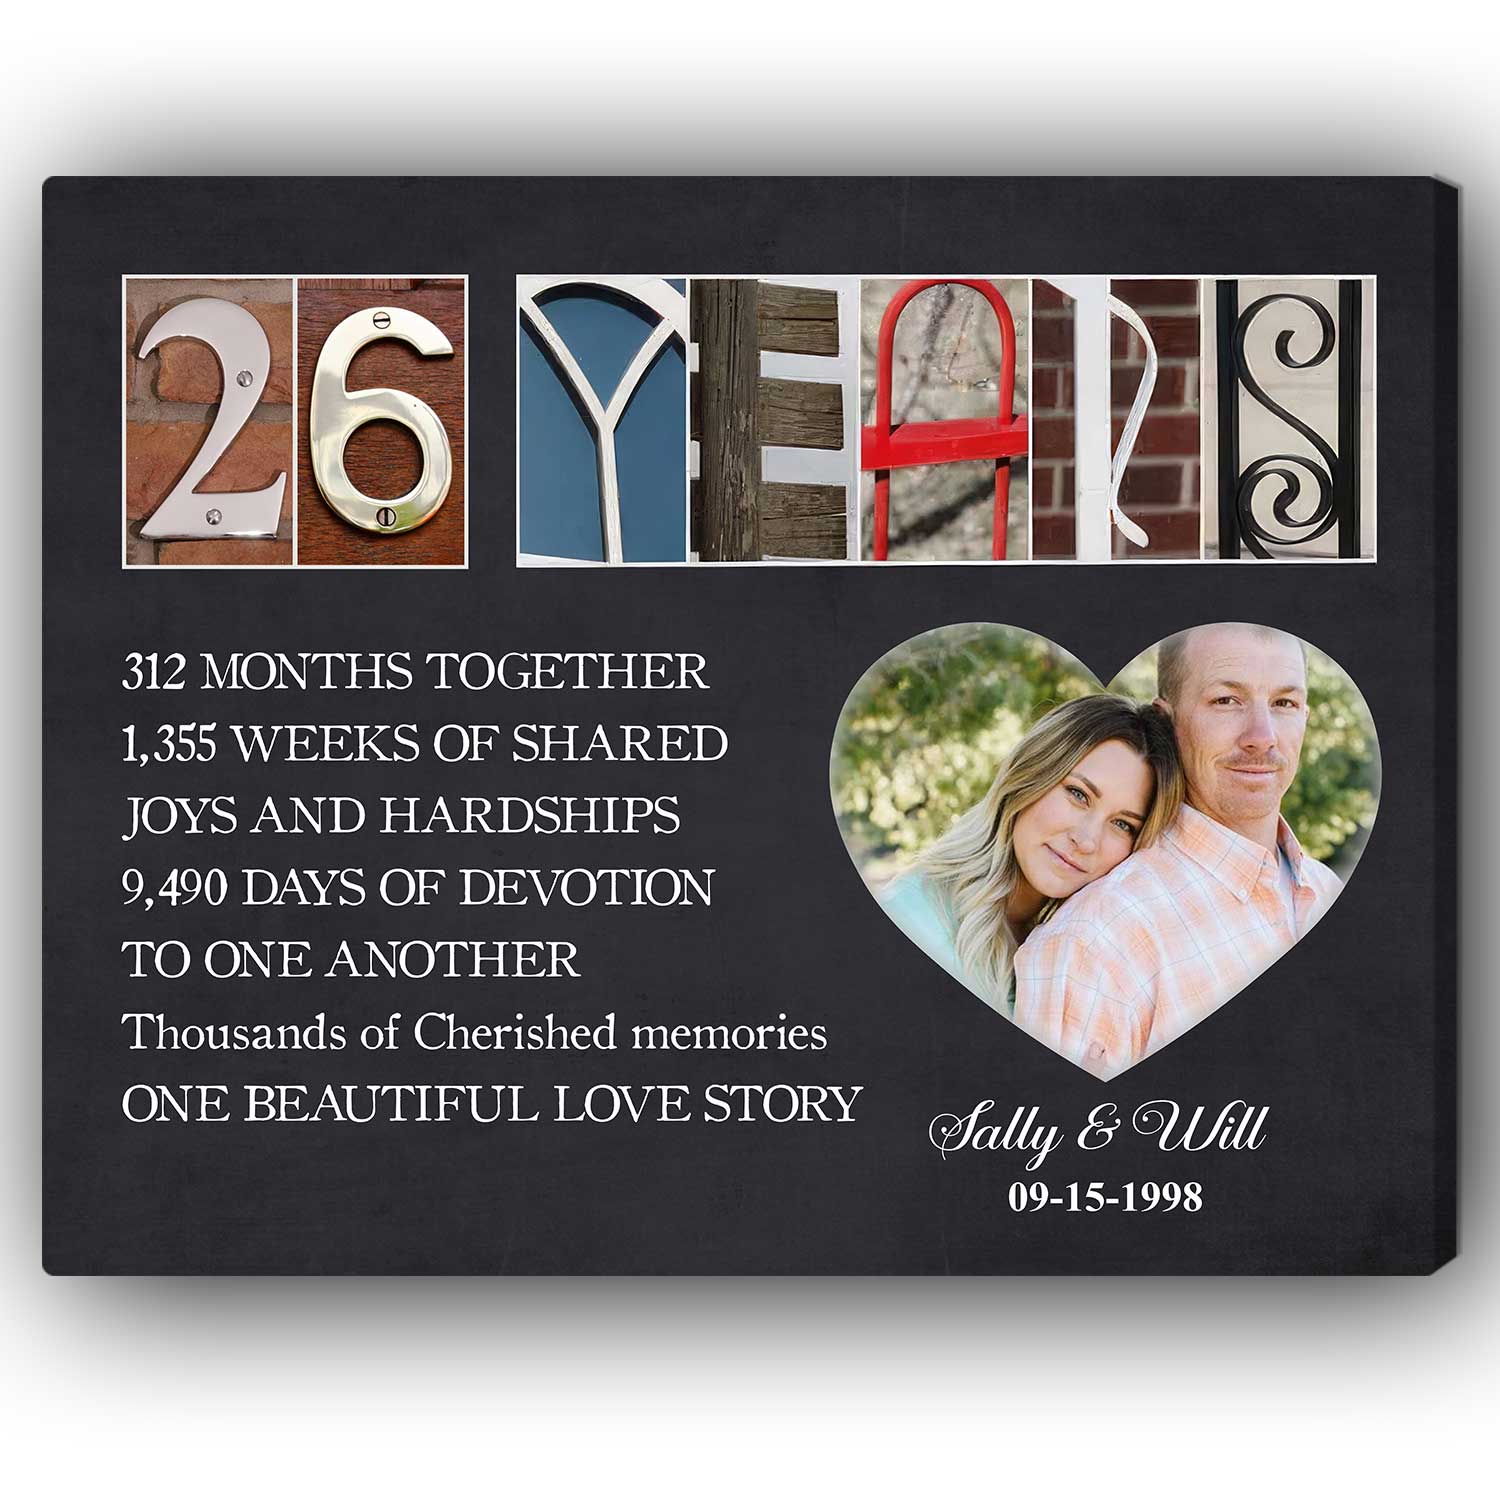 26 Years - Personalized 26 Year Anniversary gift For Parents, Husband or Wife - Custom Canvas Print - MyMindfulGifts